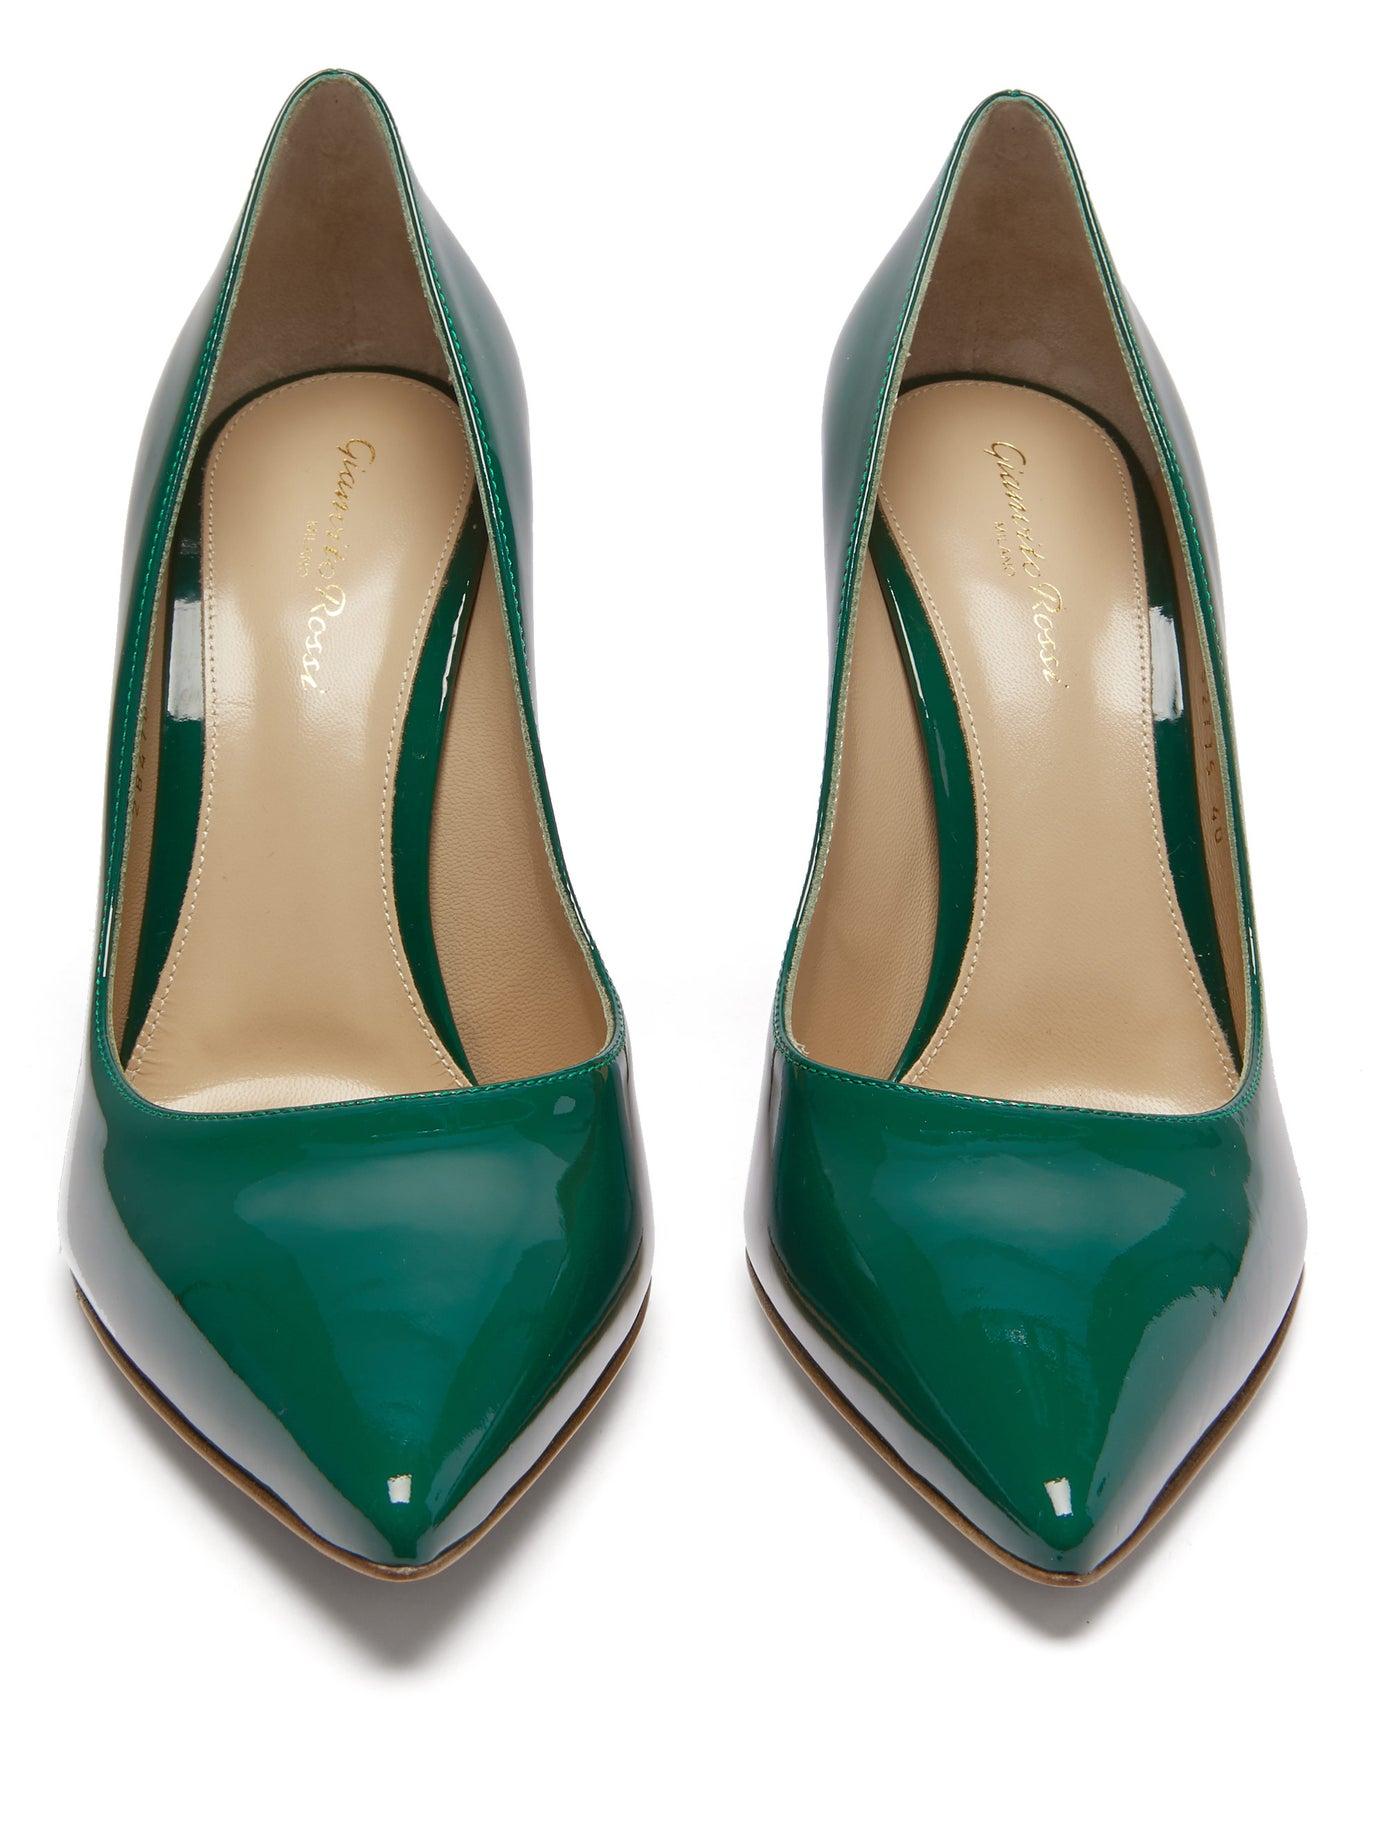 Gianvito Rossi Gianvito 105 Point-toe Patent-leather Pumps in Green | Lyst